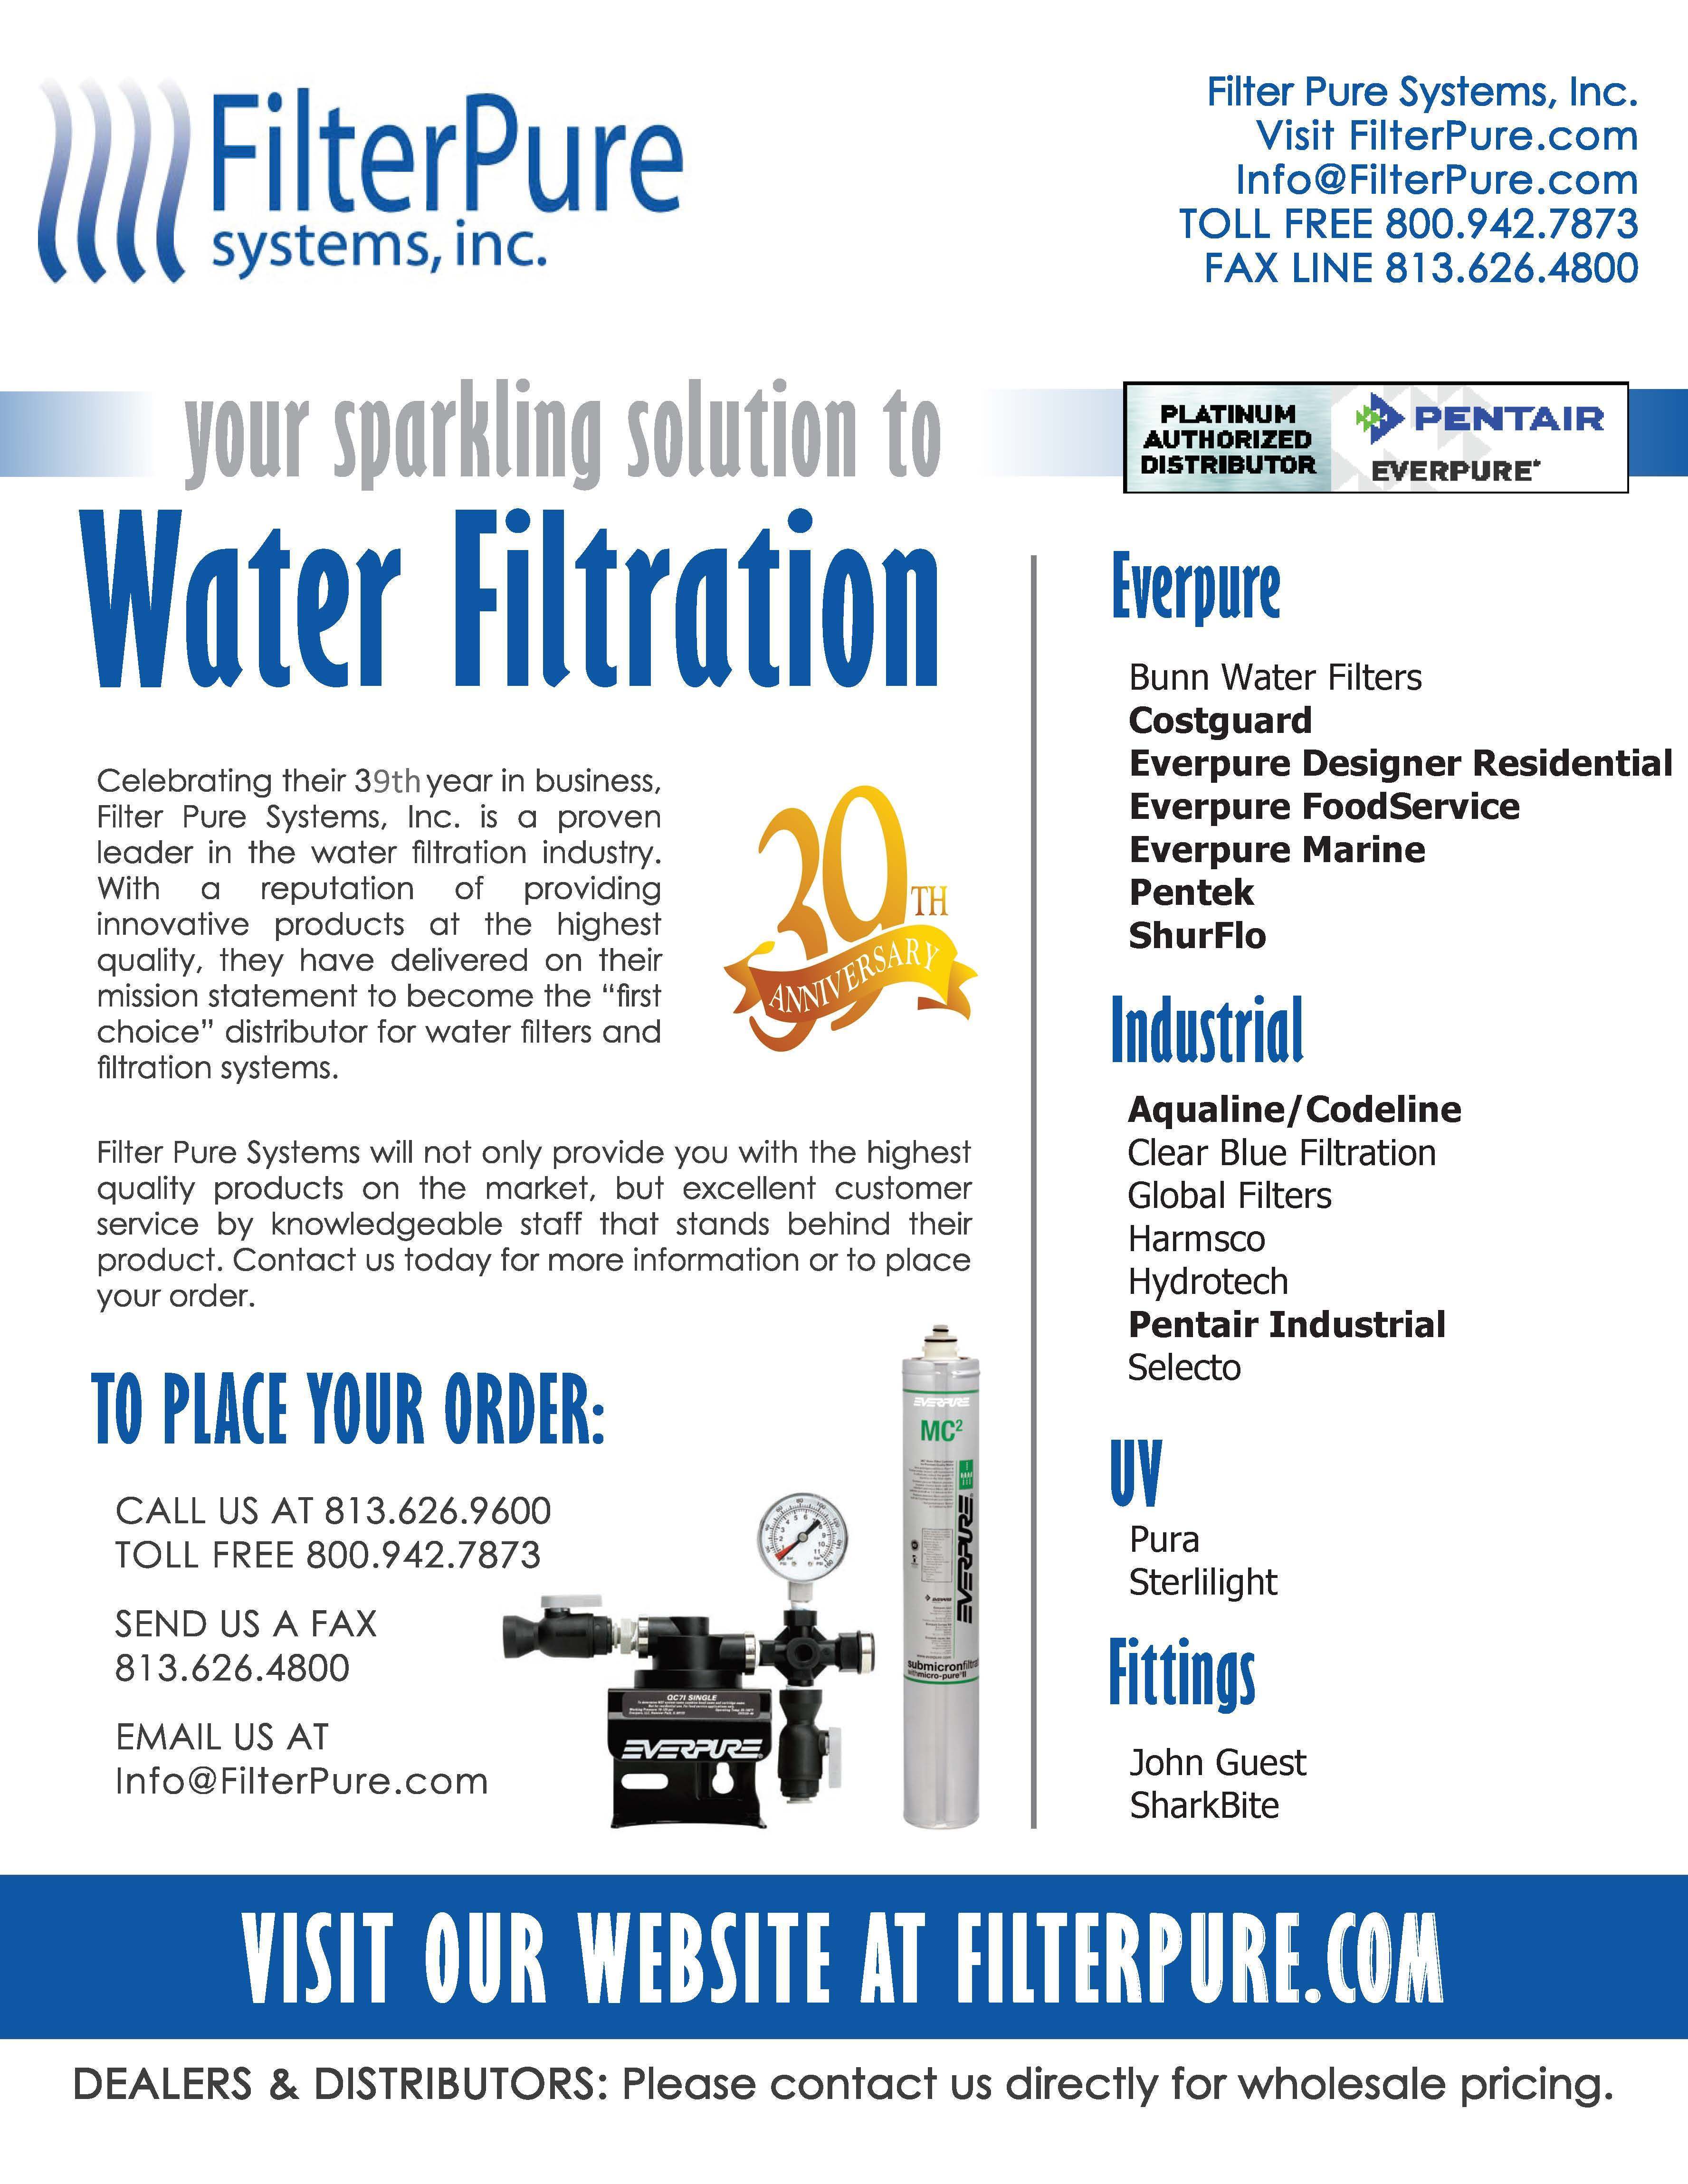 Everpure Logo - FP_LineCard_WaterFiltration 39 Years - Filter Pure